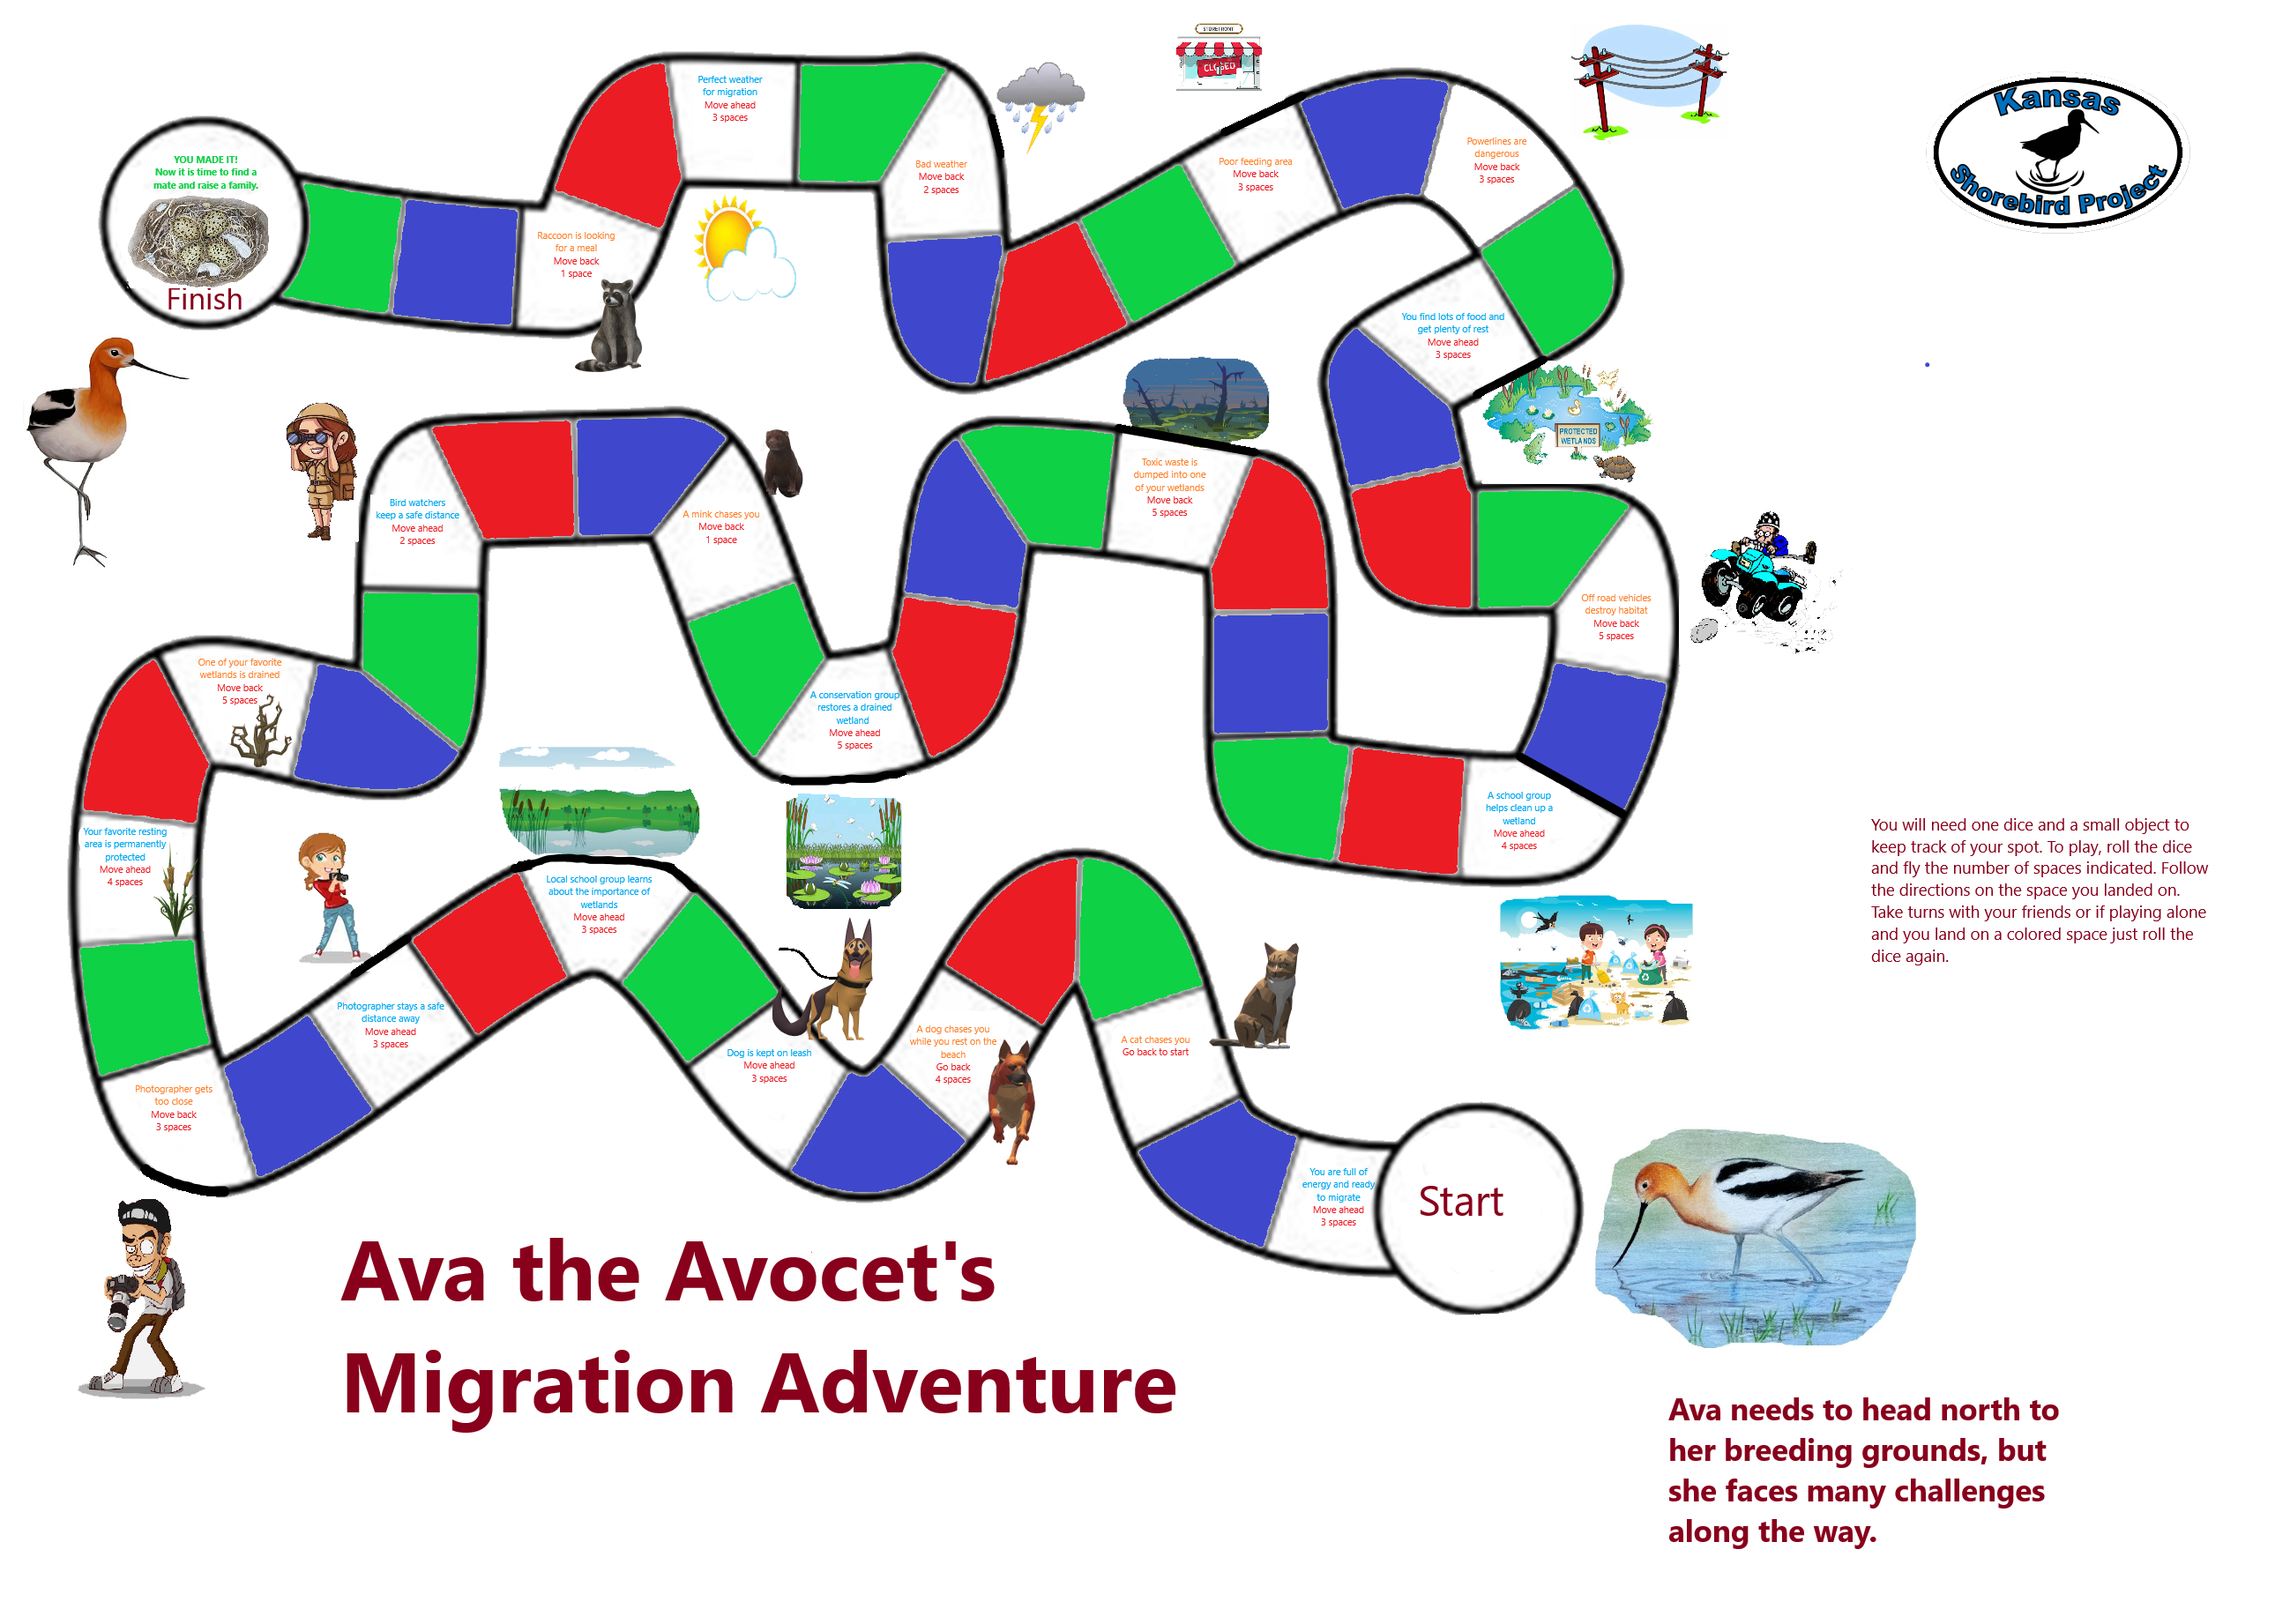 ava-the-avocet-migration-adventure-1.png